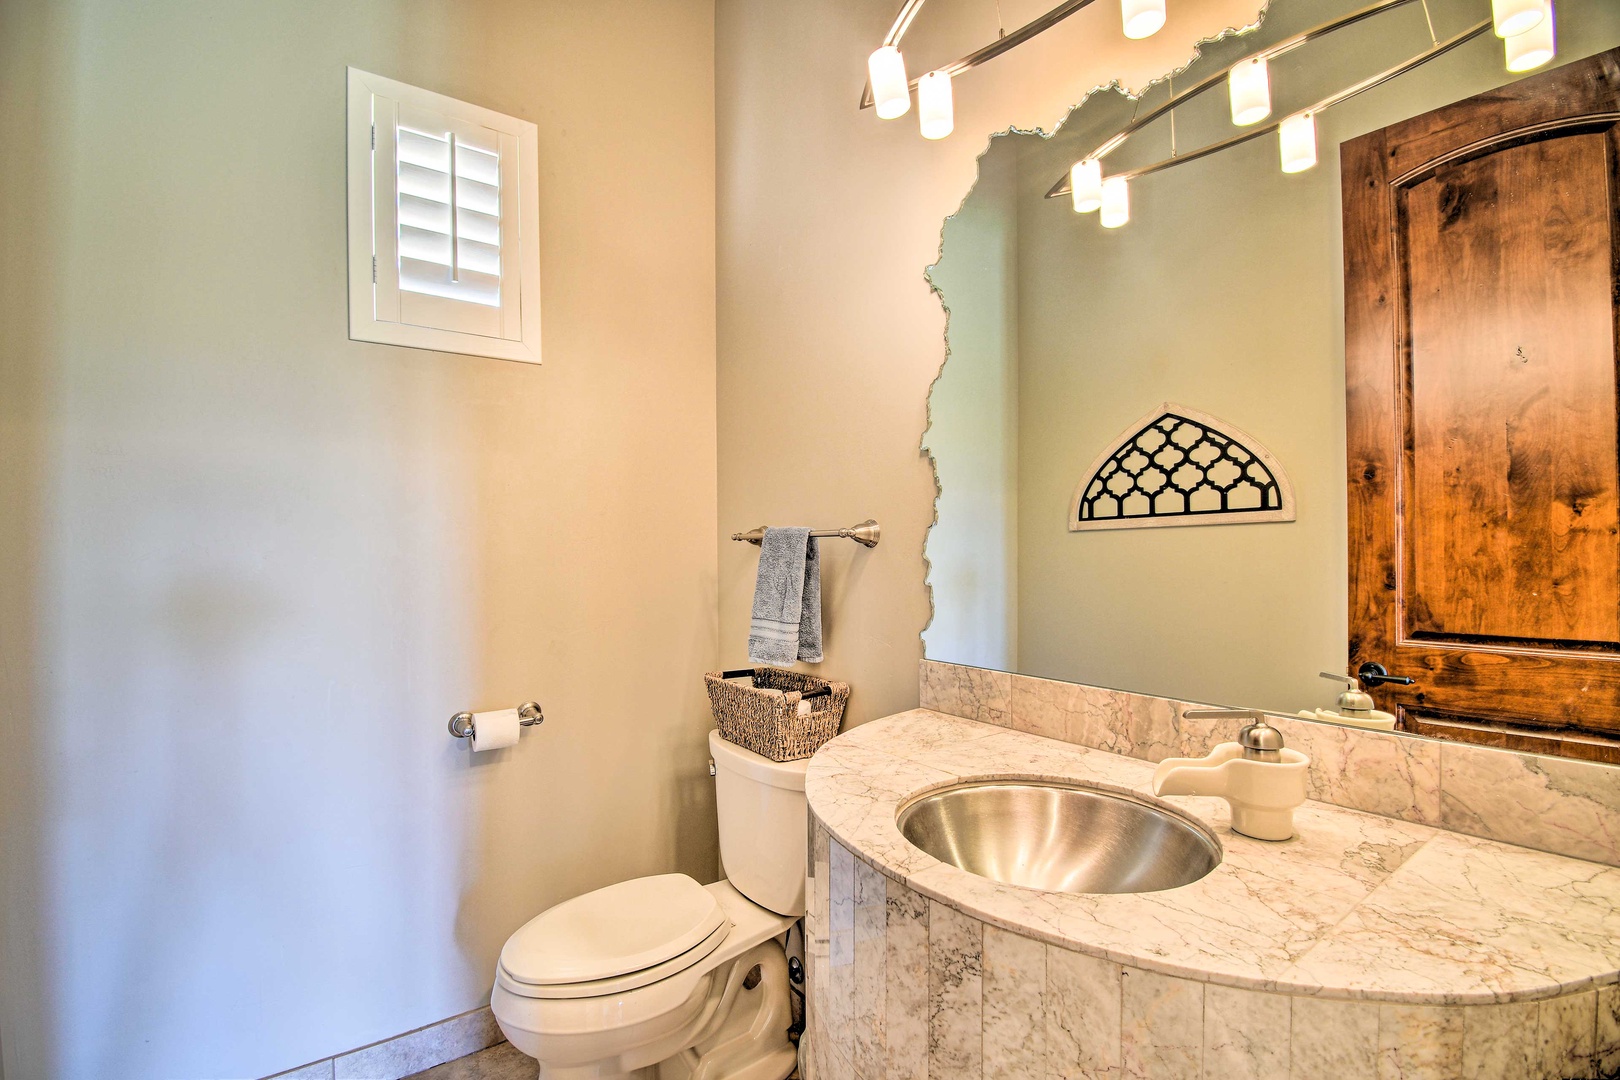 An elegant powder room is conveniently tucked away